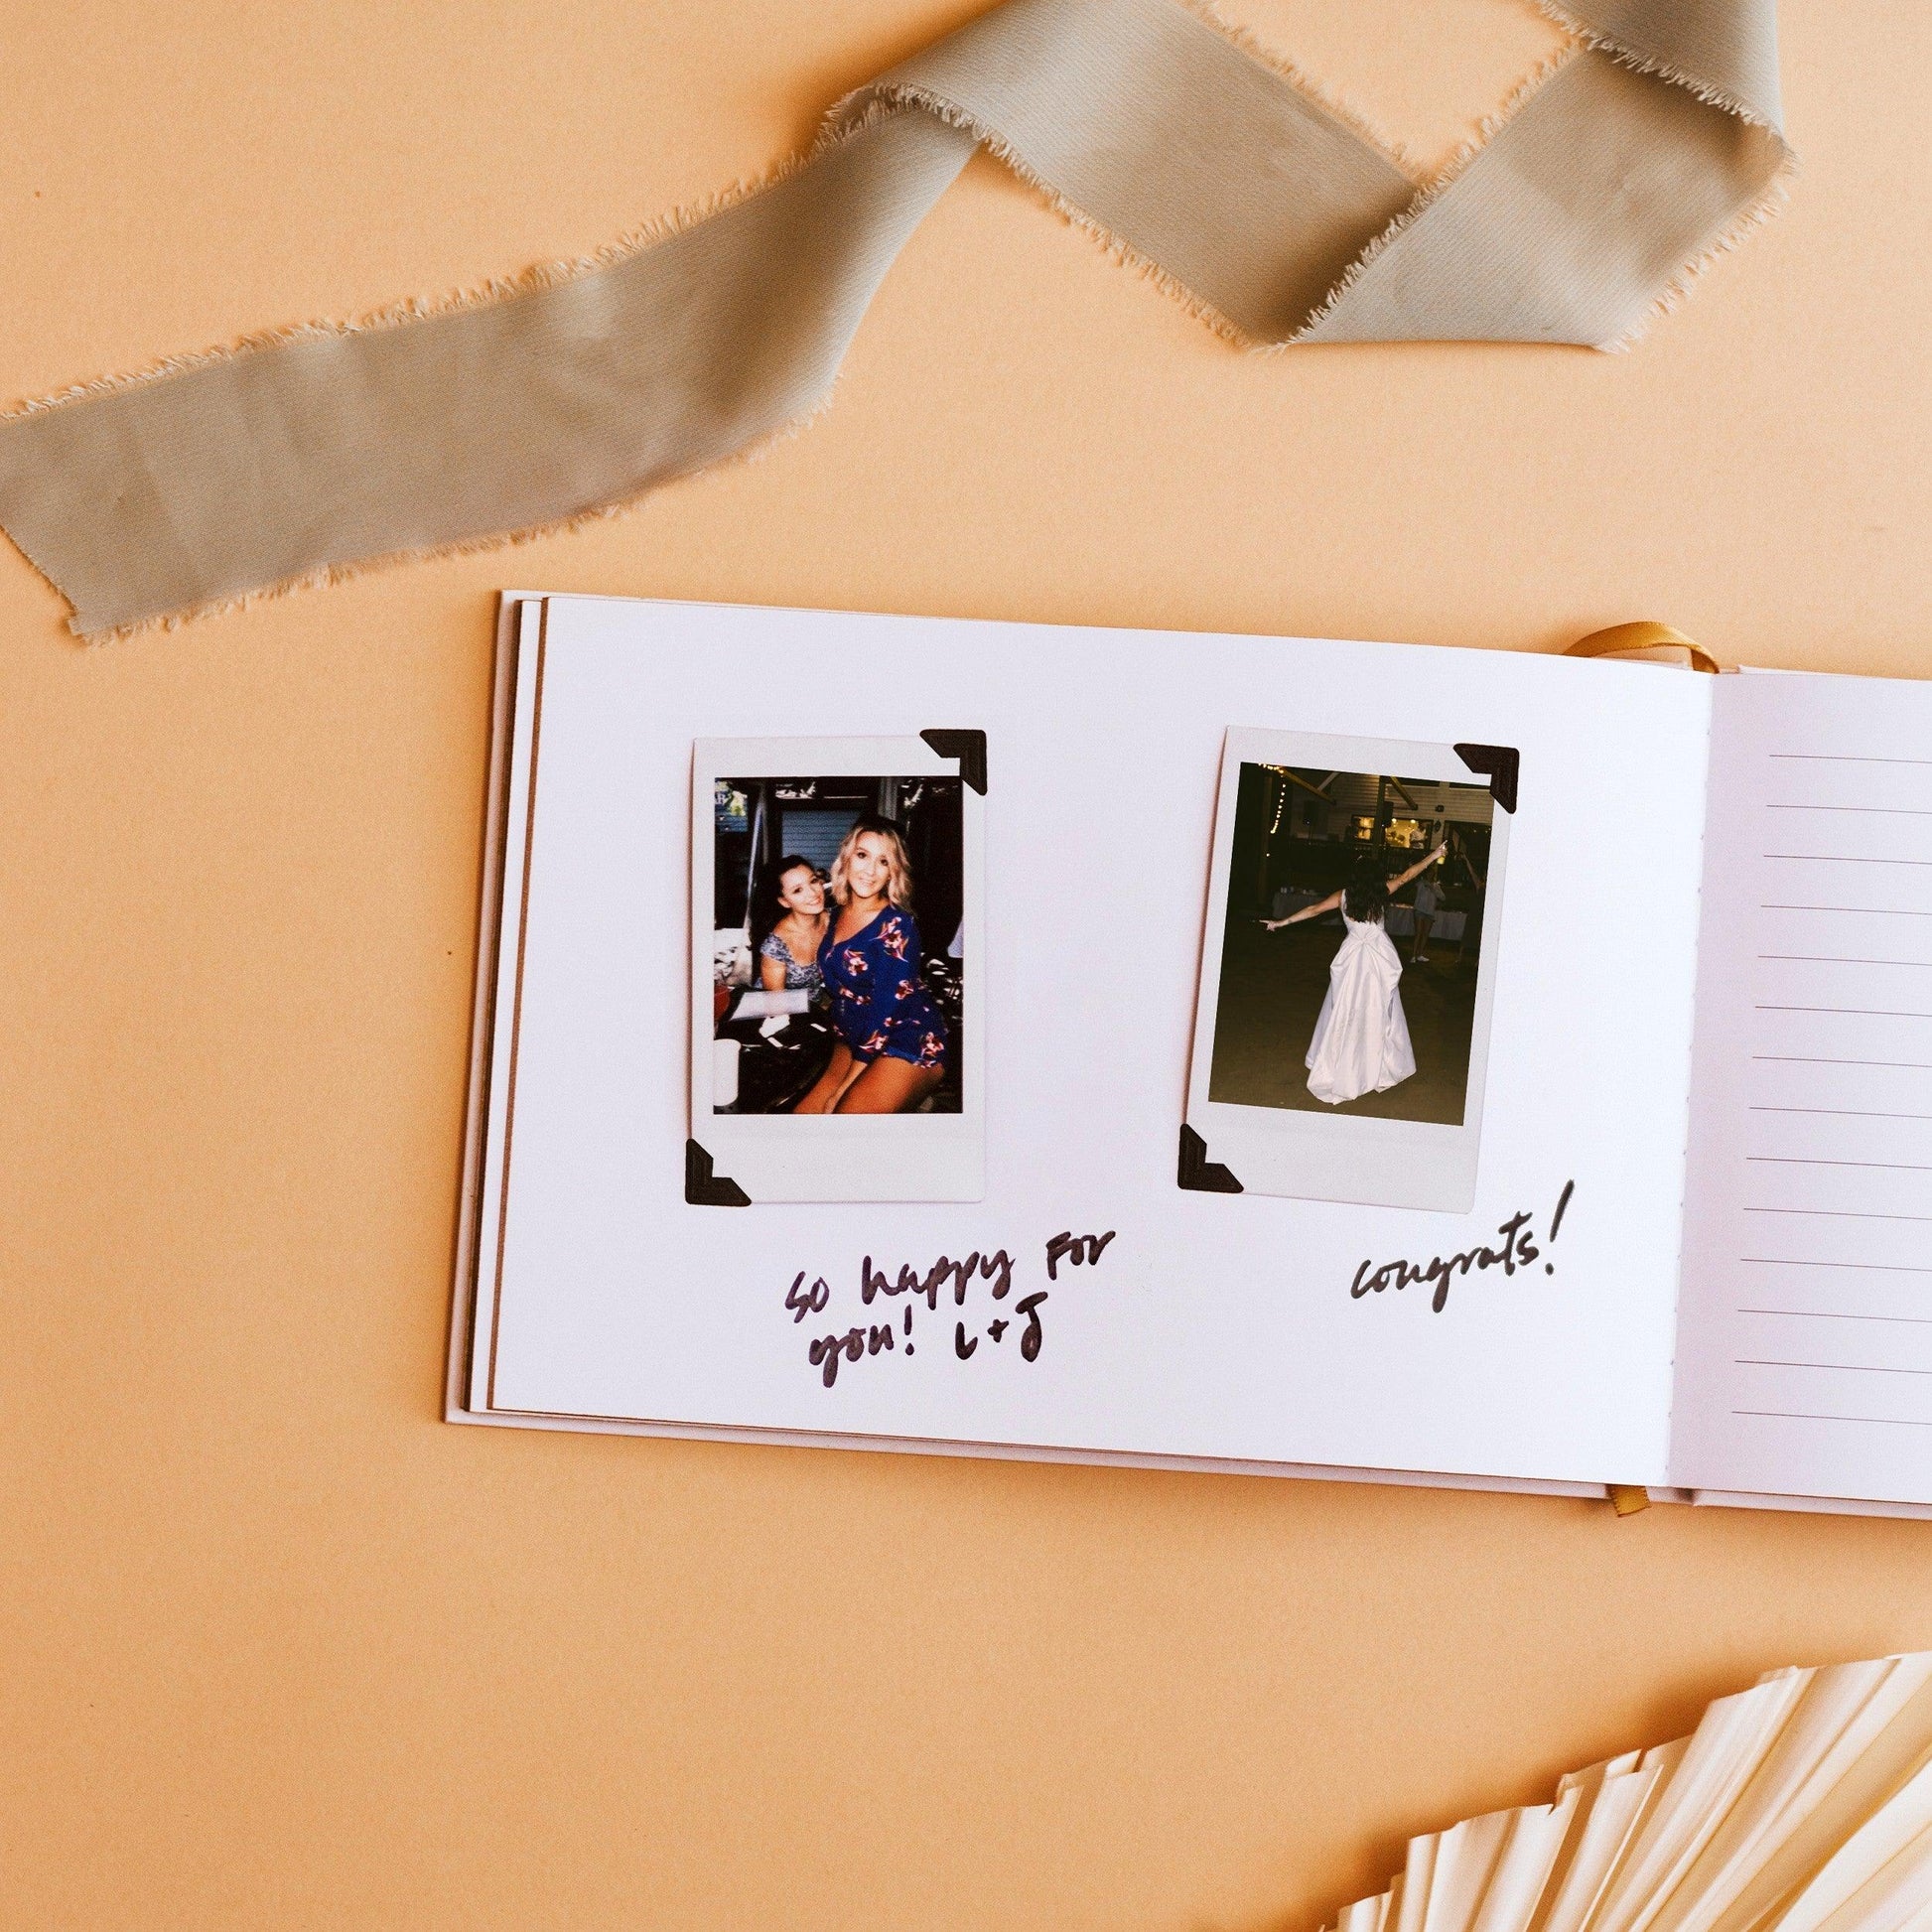 How to Set Up a Polaroid Guest Book Station  Polaroid guest book, Wedding  guest book unique, Wedding guest book